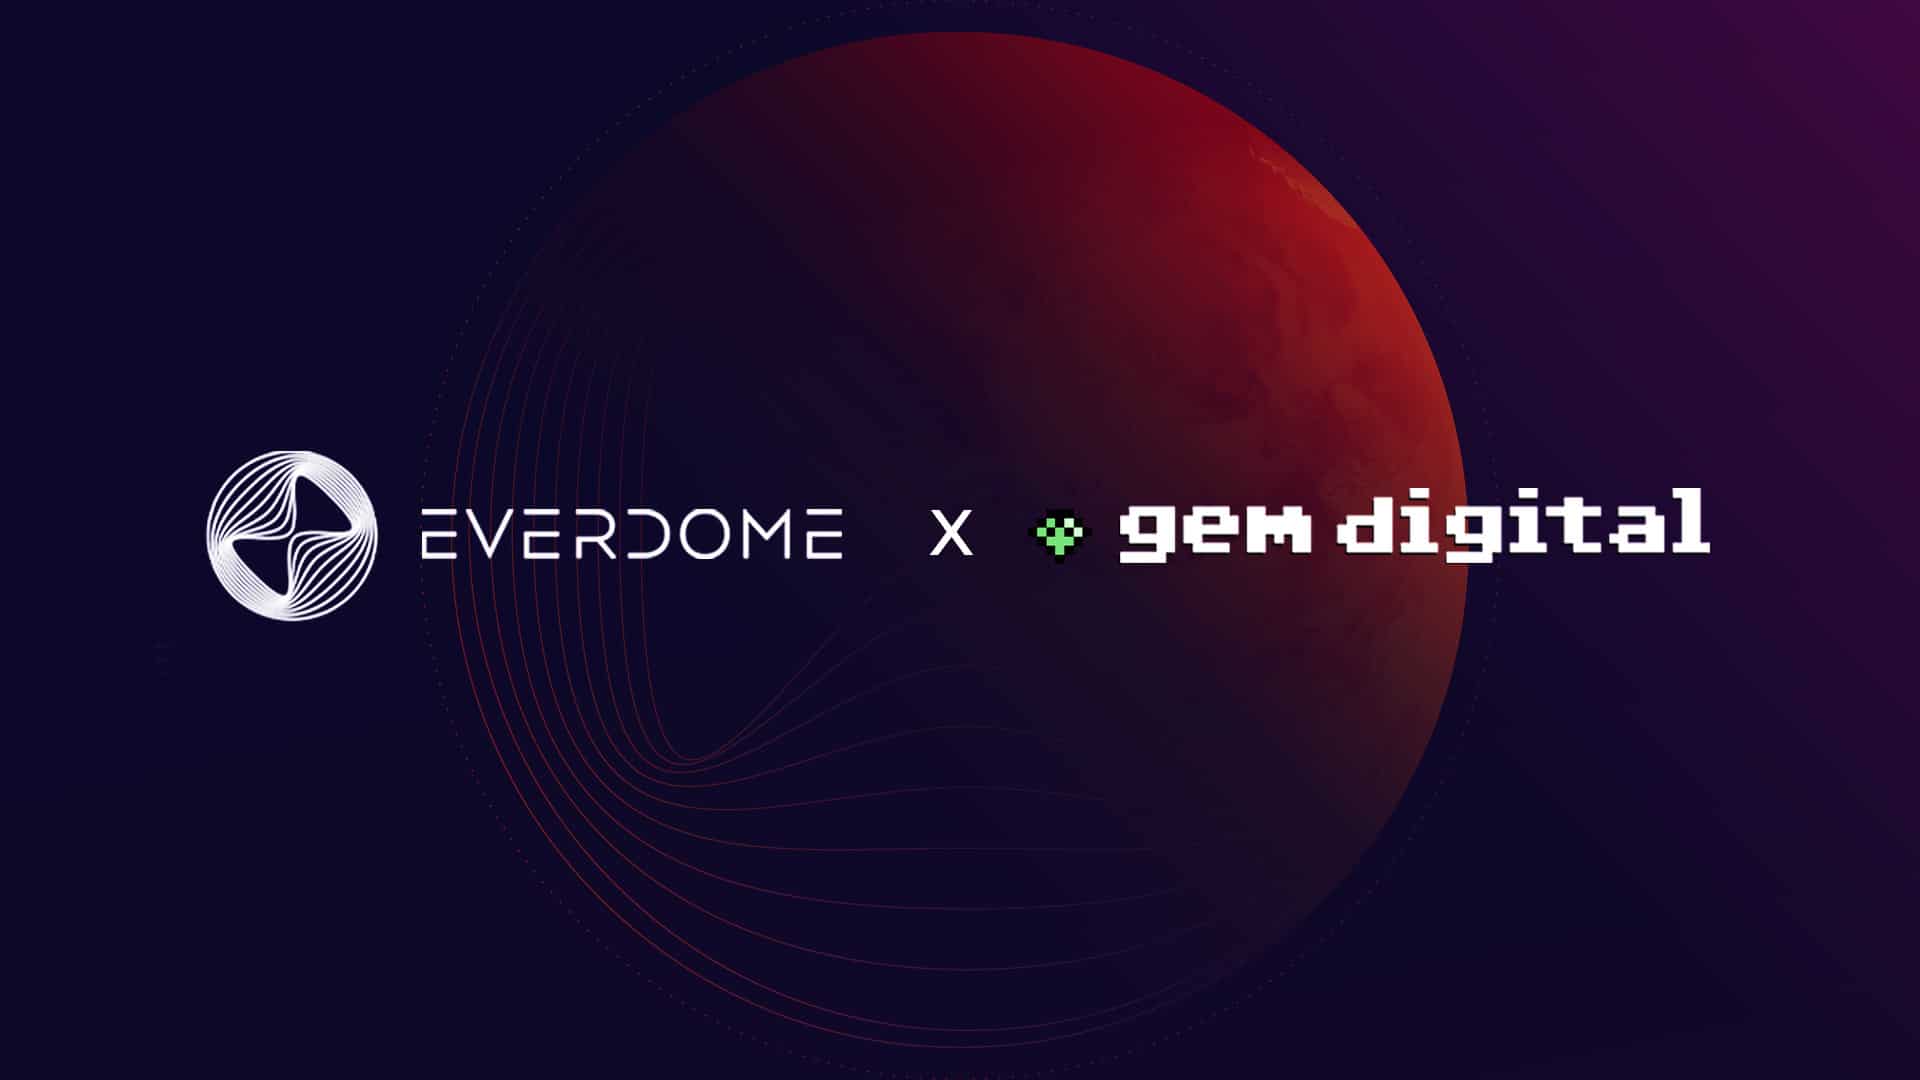 Everdome Secures $10M Investment Commitment From GEM Digital Limited